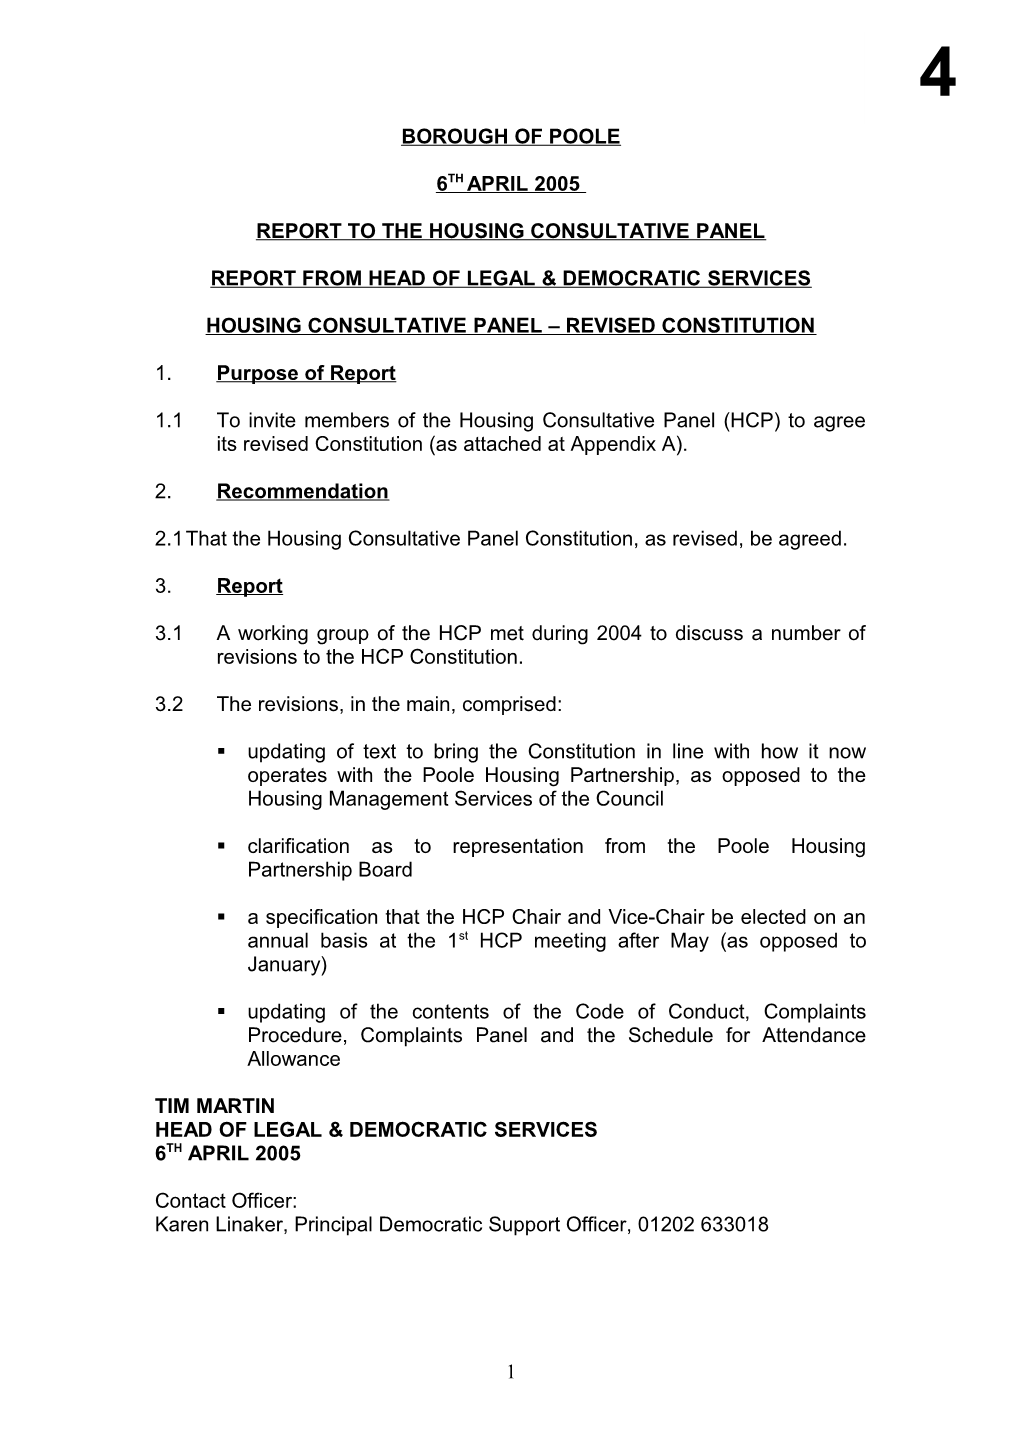 Report to the Housing Consultative Panel